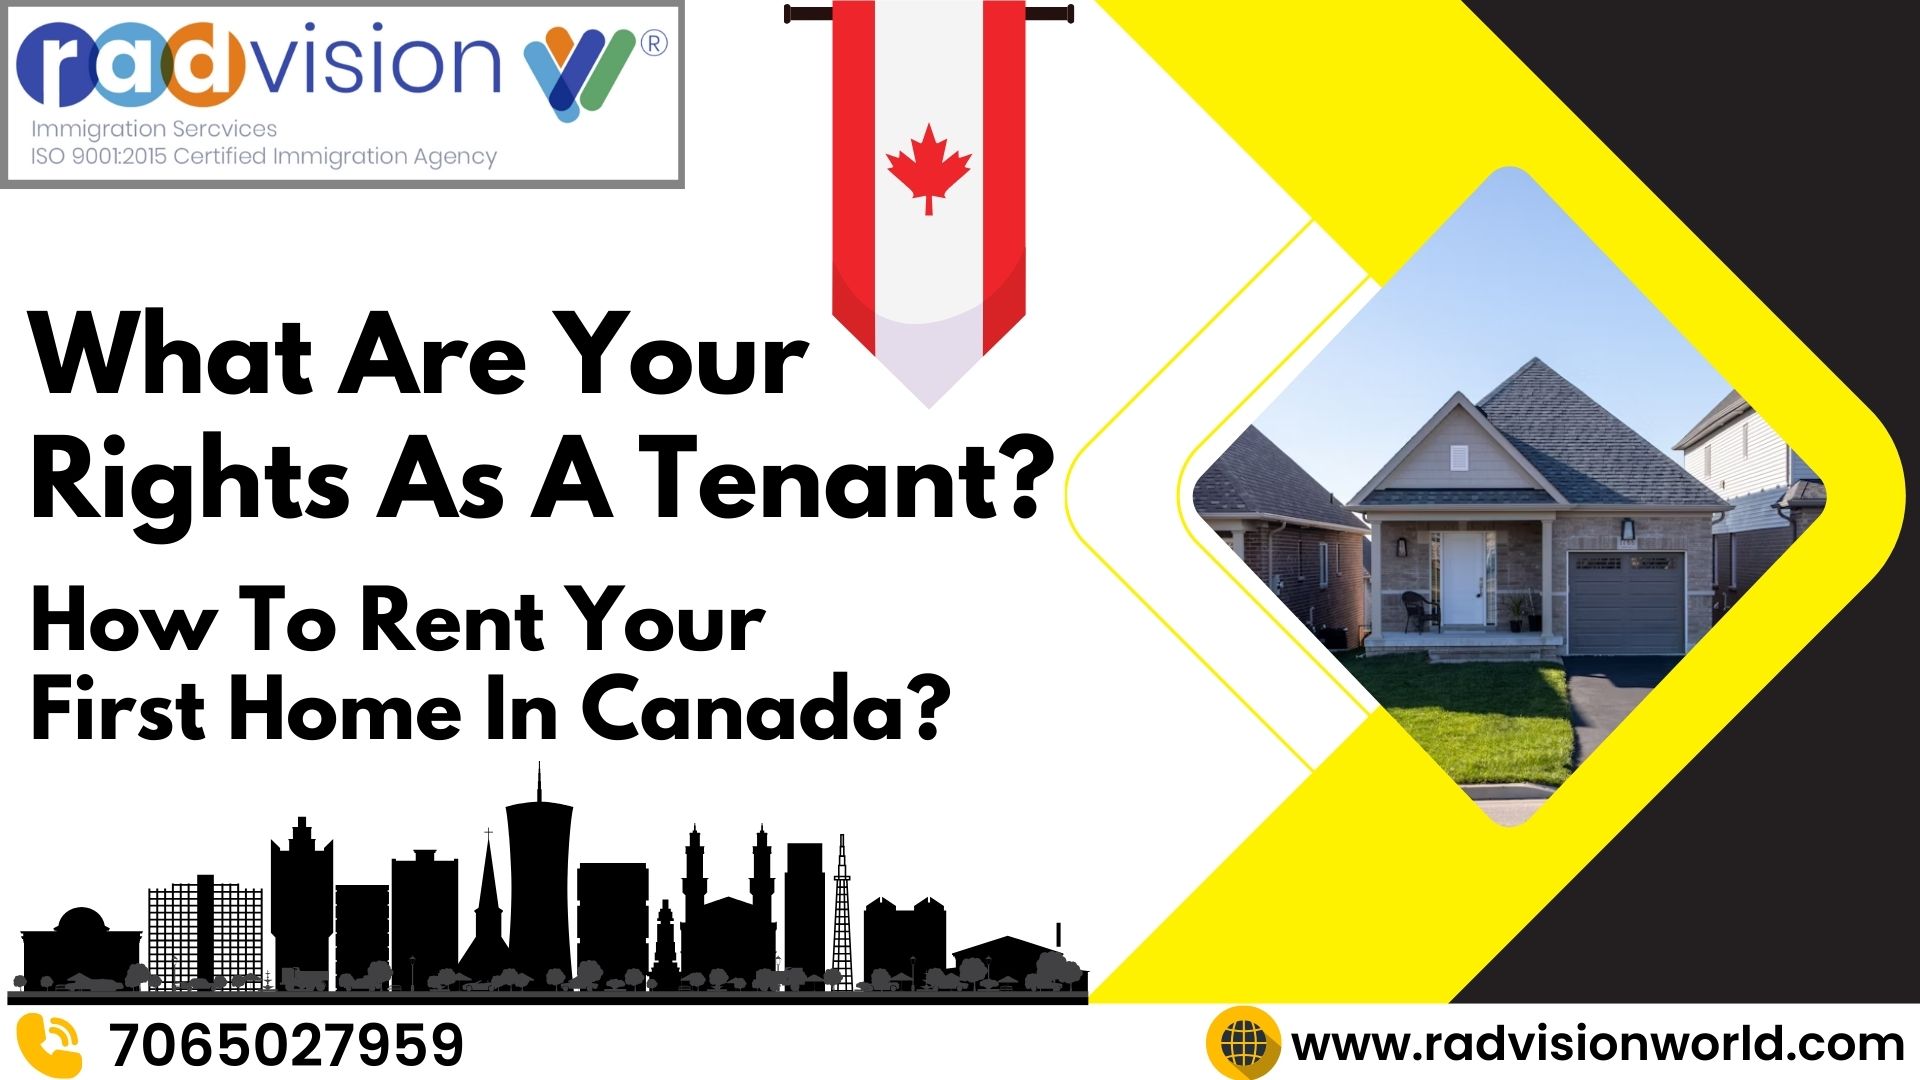 What Are Your Rights As a Tenant How To Rent Your First Home In Canada